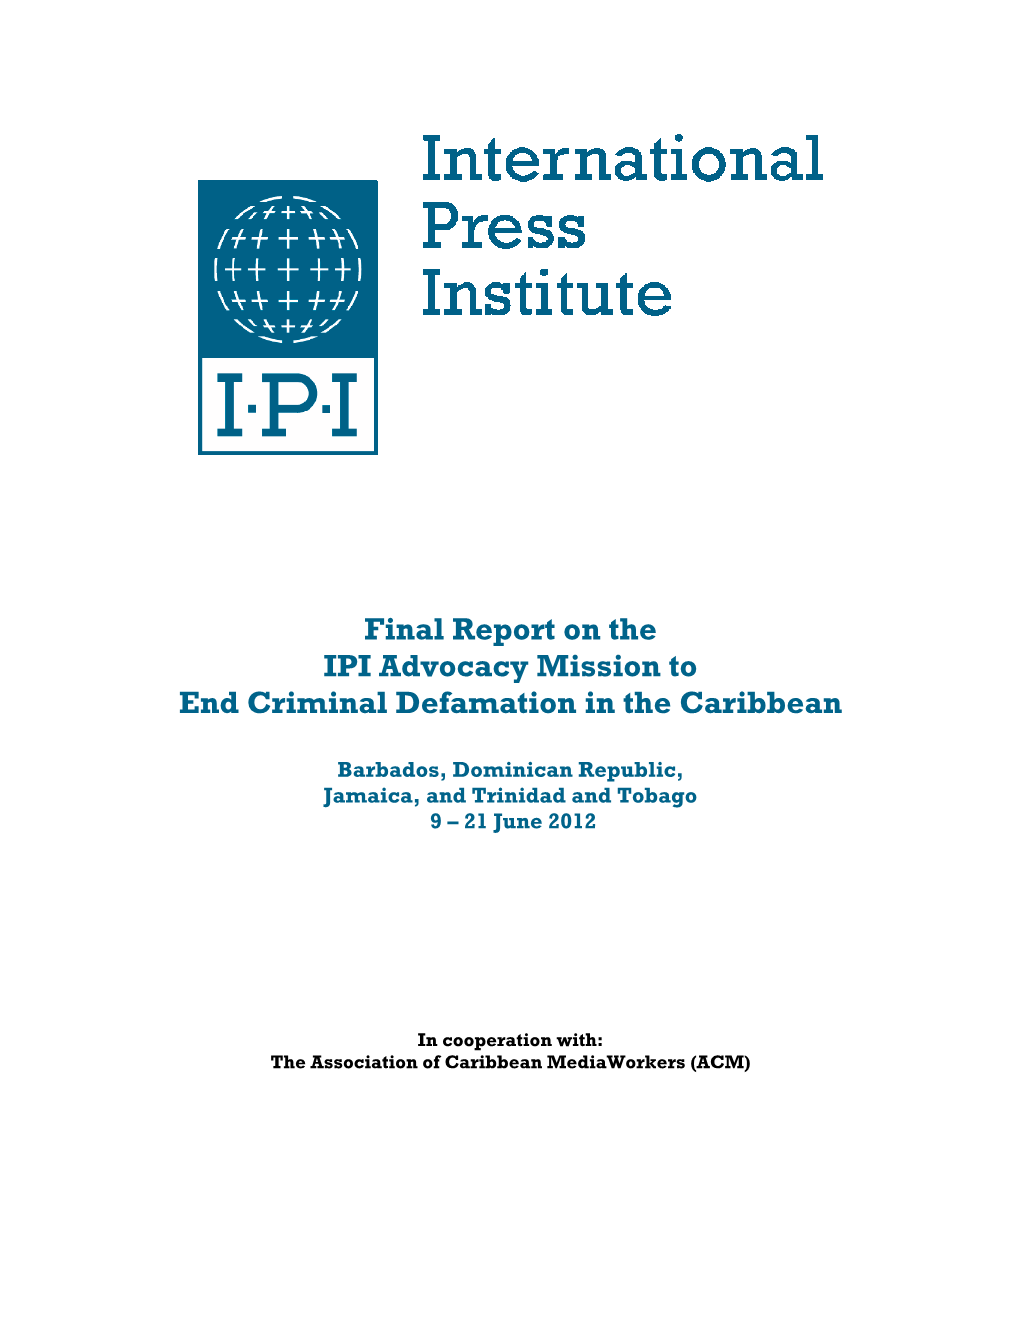 Final Report on the IPI Advocacy Mission to End Criminal Defamation in the Caribbean